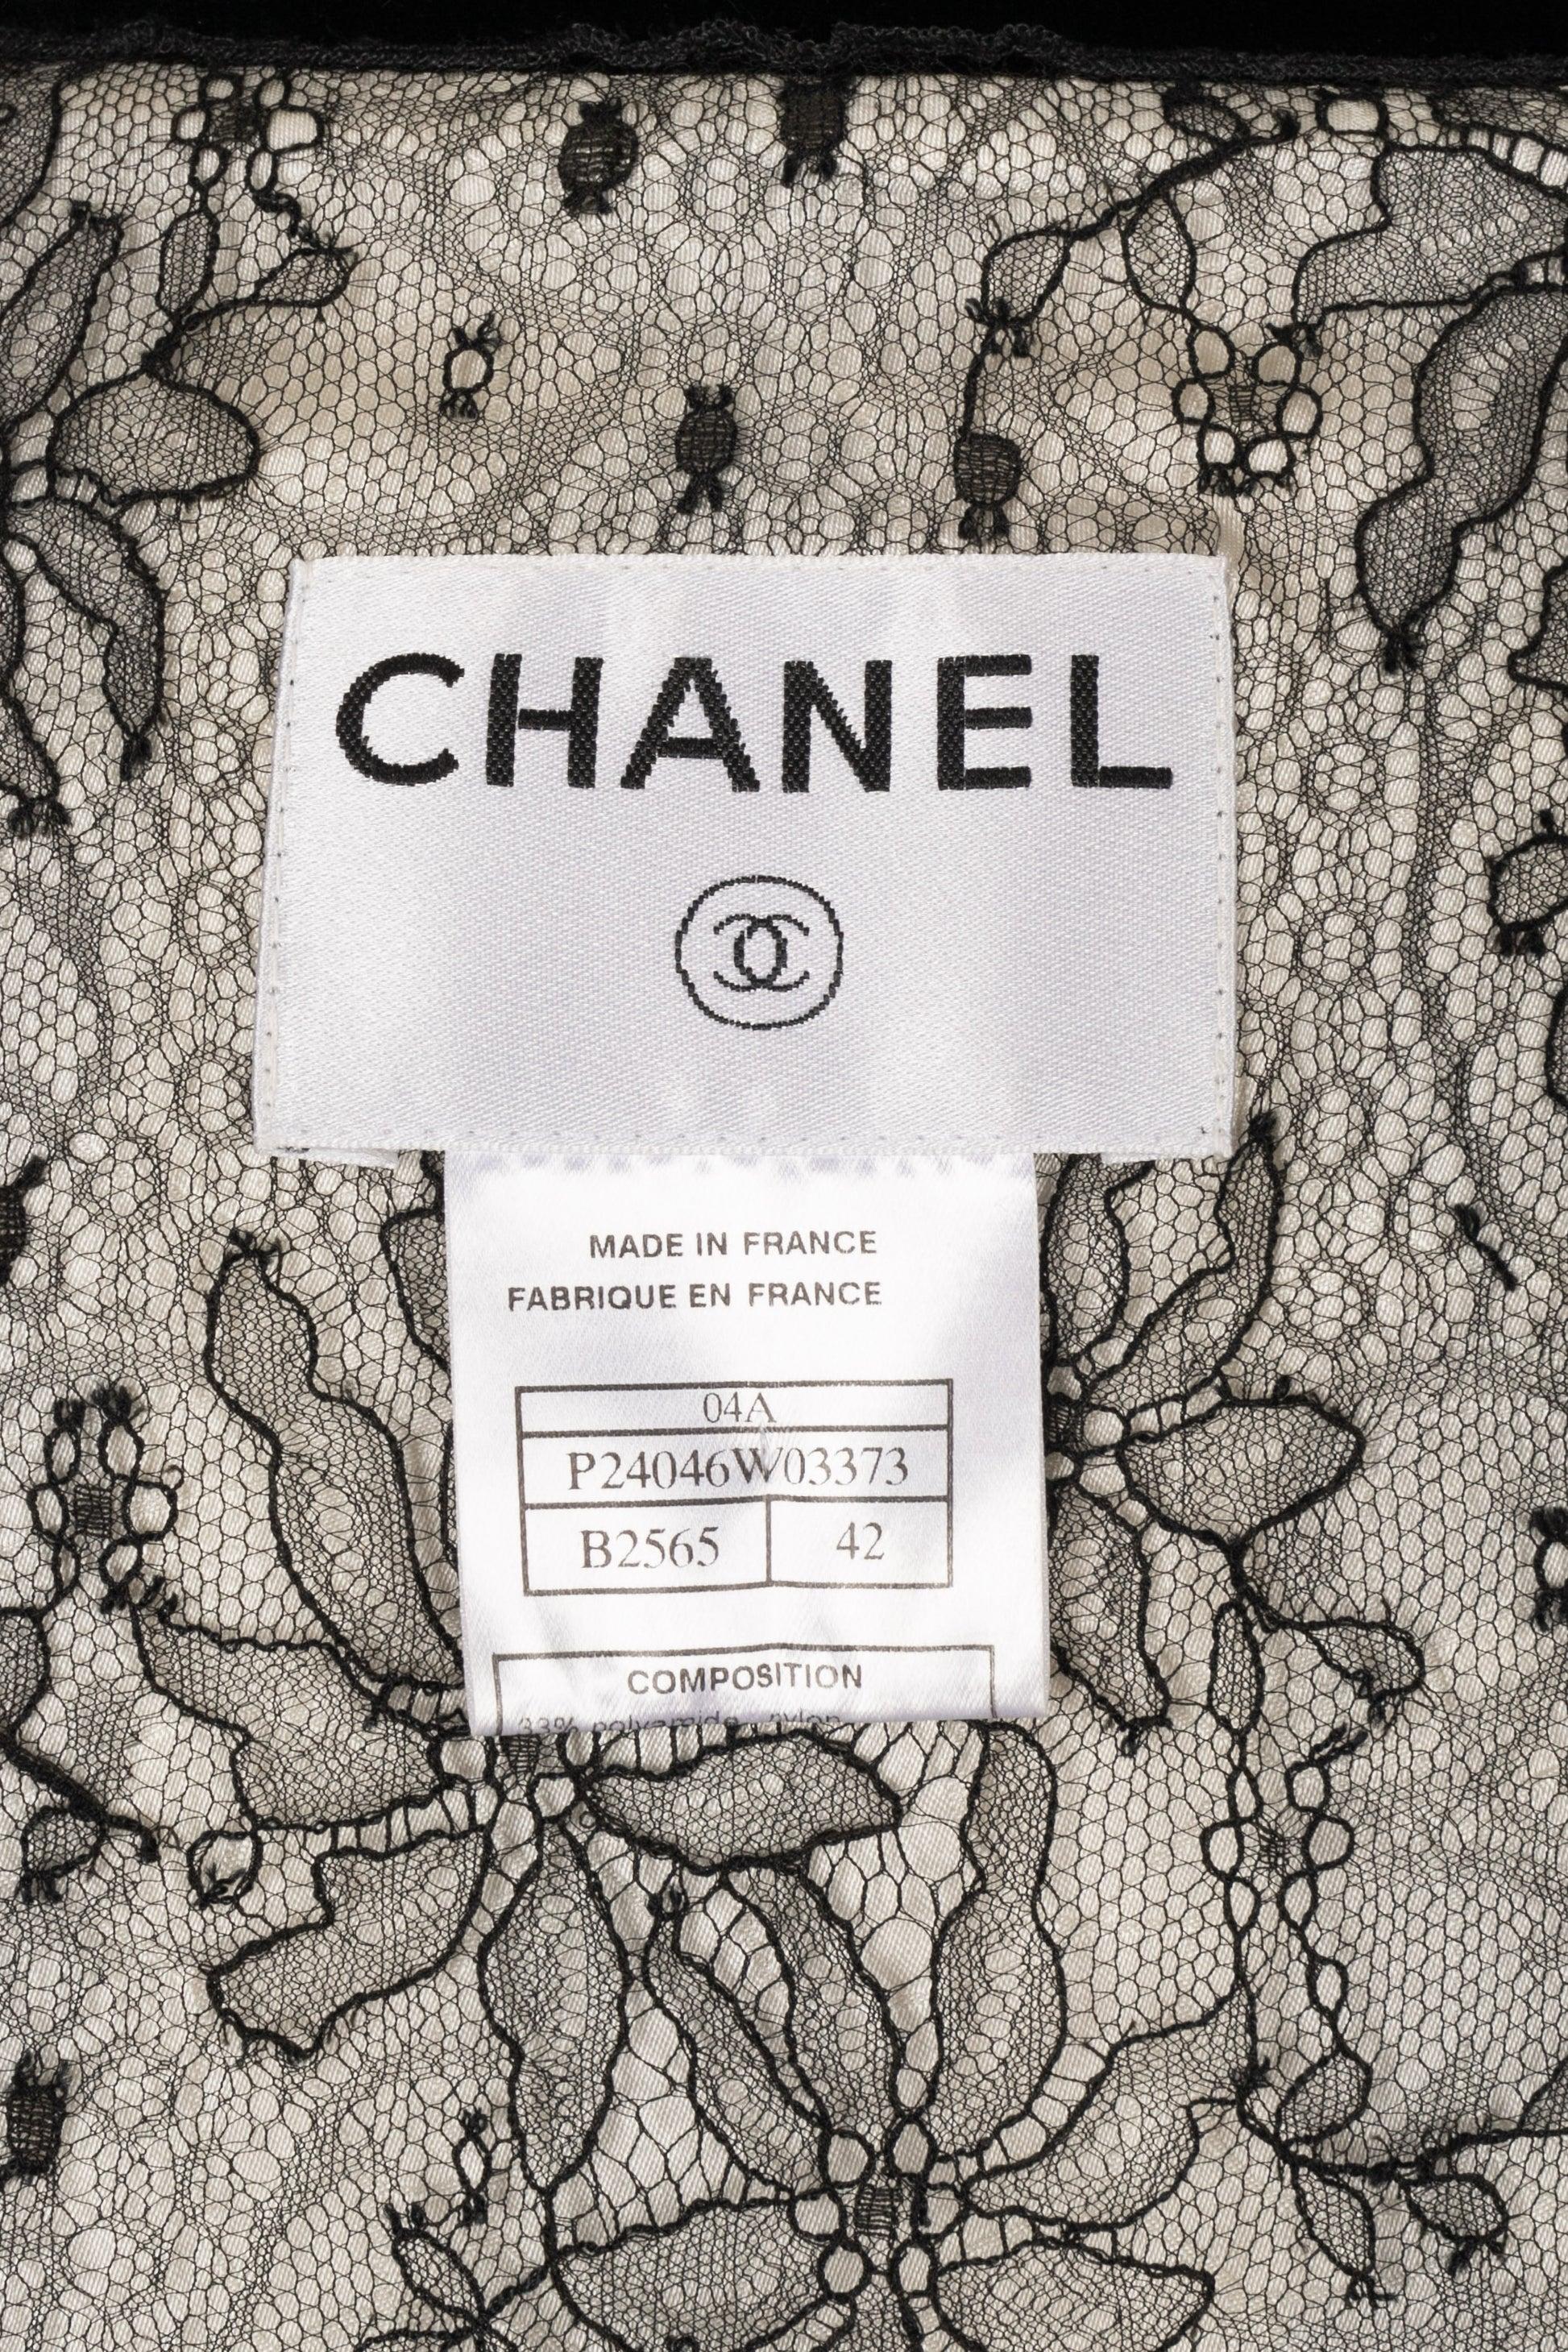 Chanel Black and White Jacket with Velvet Neck For Sale 5